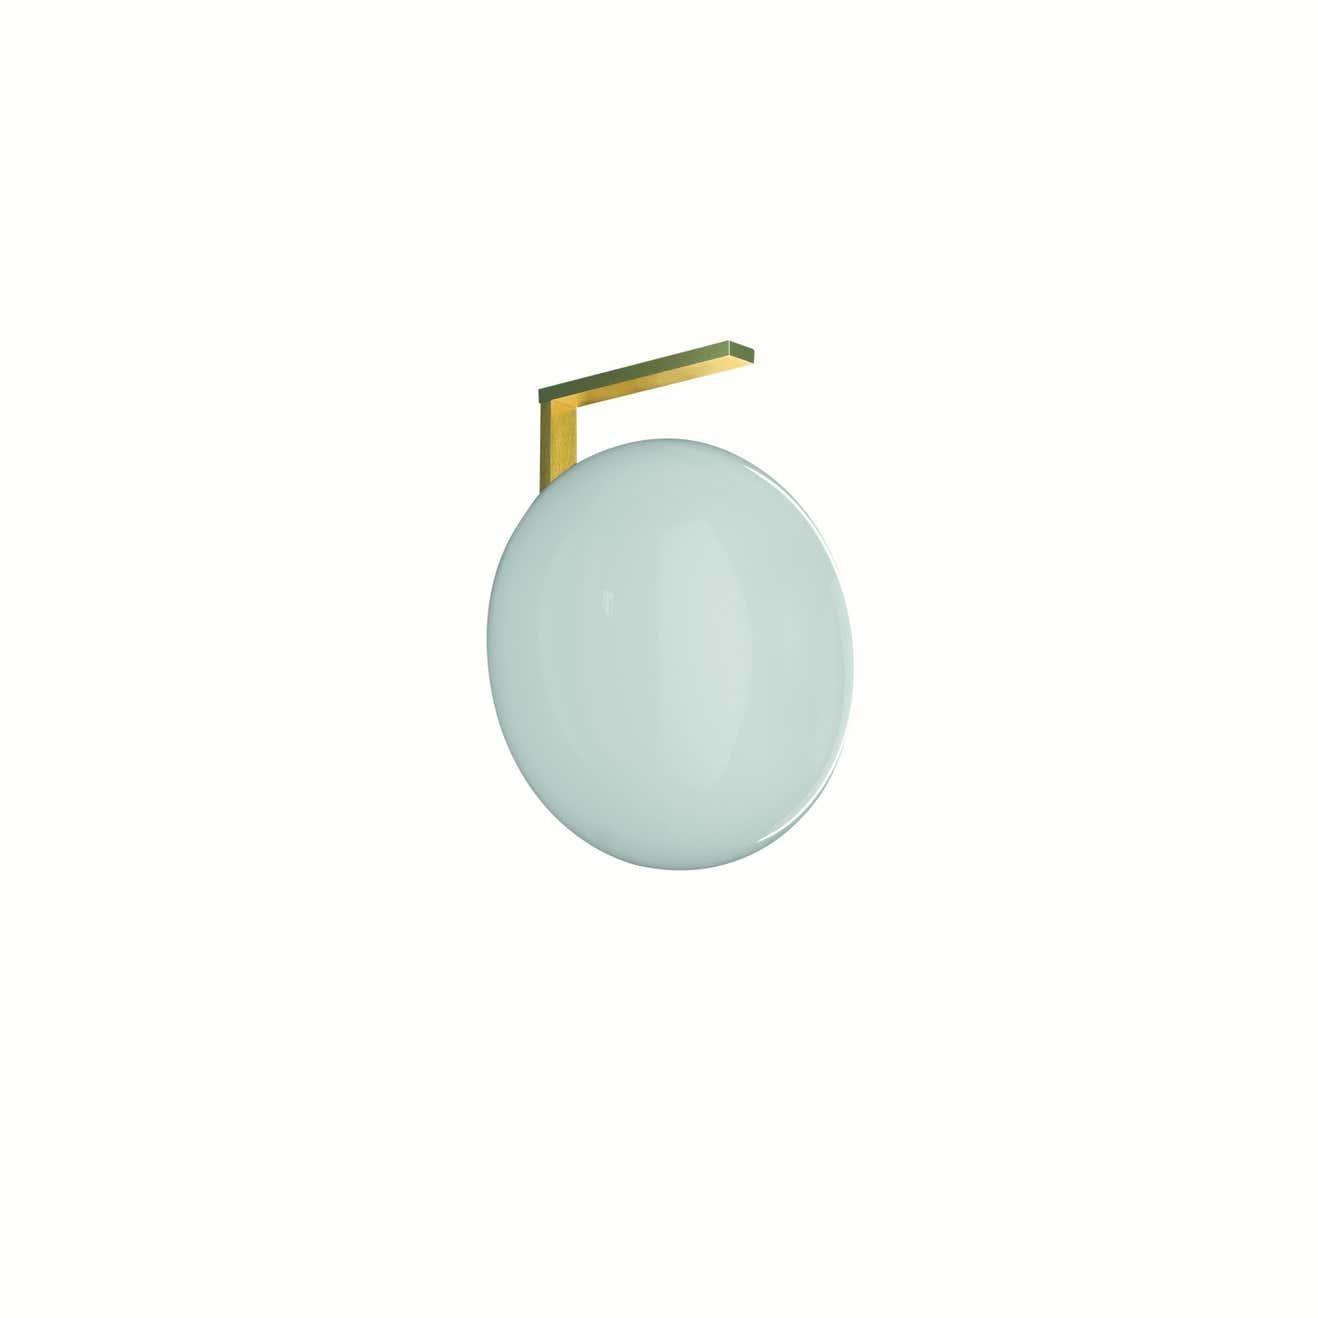 Contemporary Mariana Pellegrino Soto Wall Lamp 'Alba' Opaline Glass and Brass by Oluce